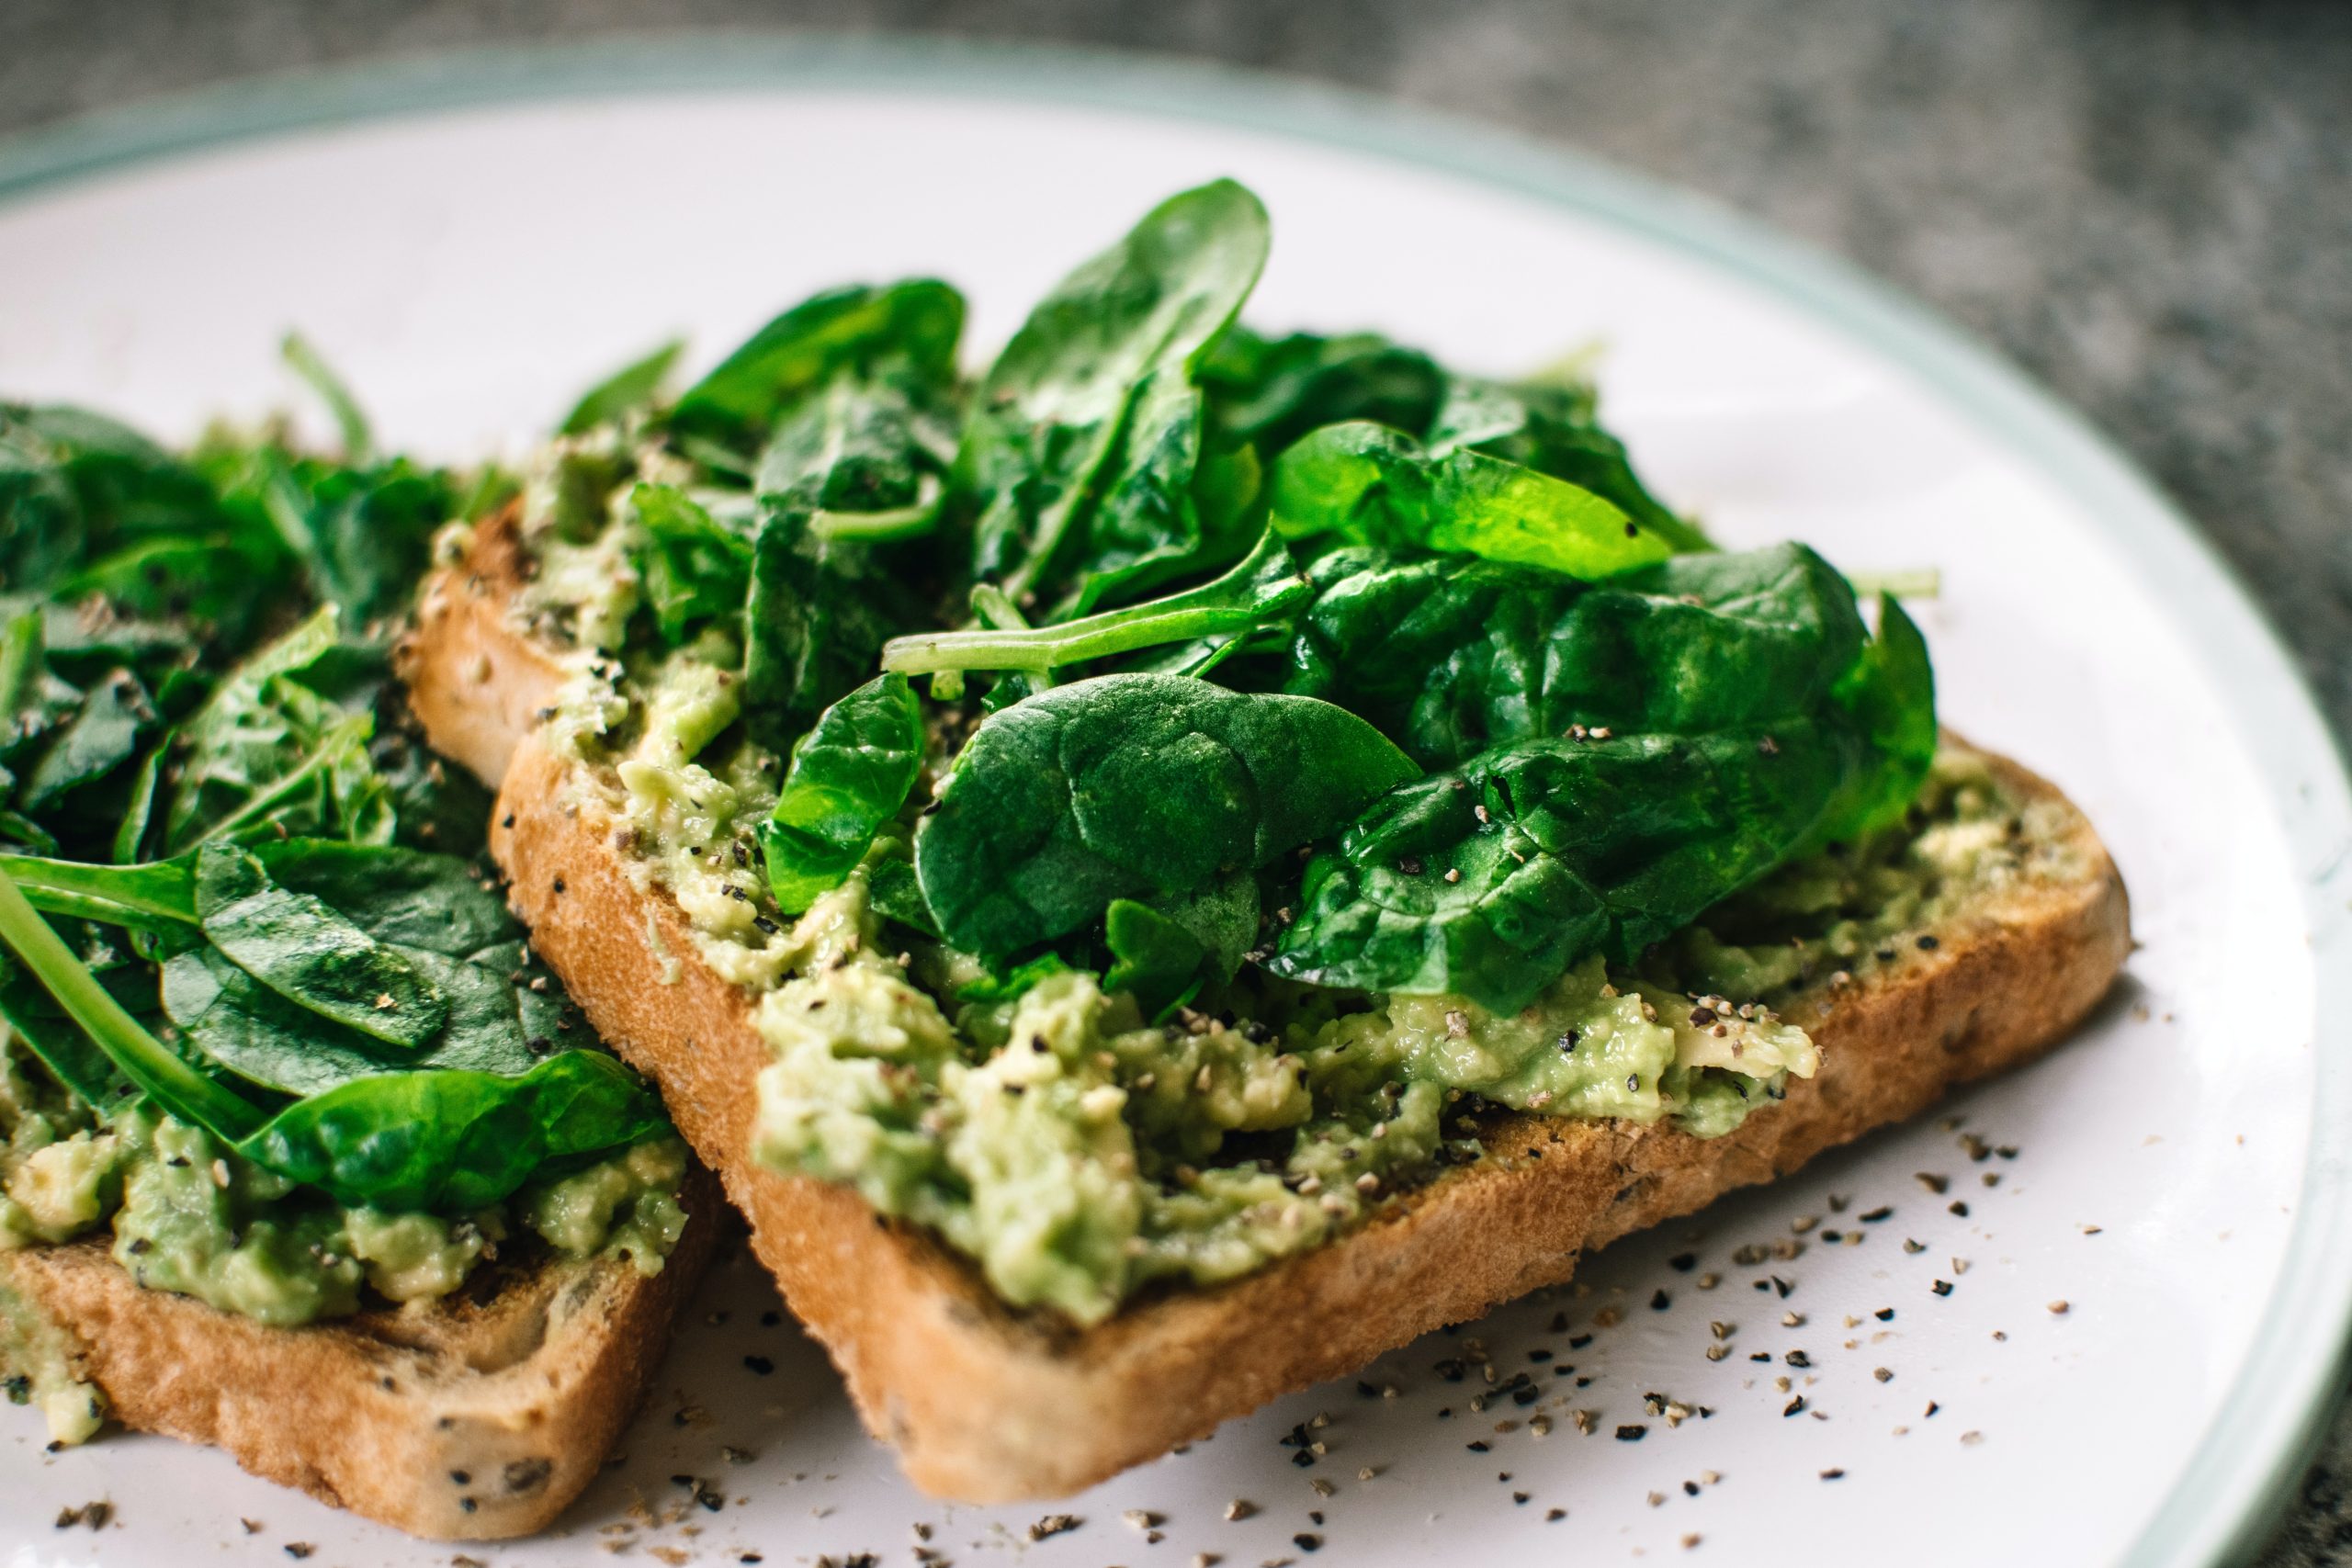 Saving for your future doesn’t mean giving up avocado toast